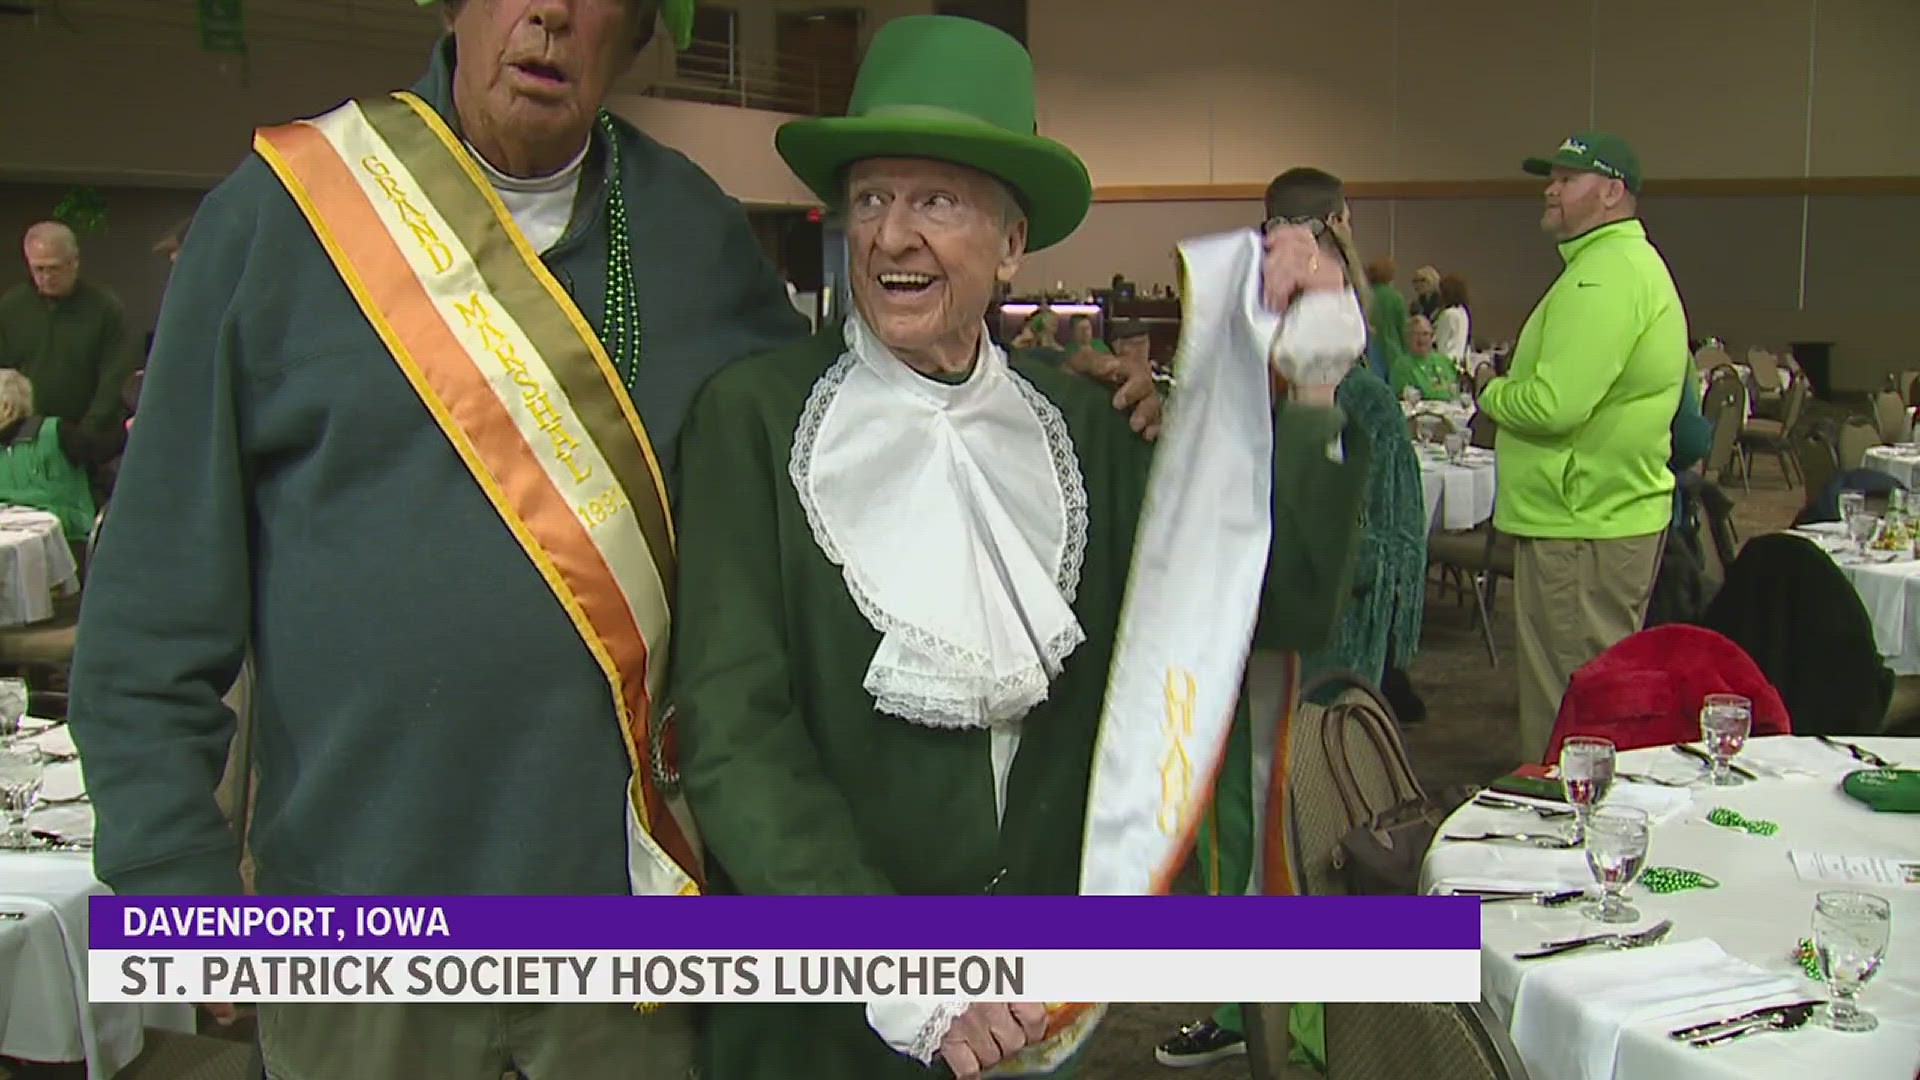 Traditional food and music, as well as a full bar, welcomed visitors to the annual luncheon in true Irish fashion.